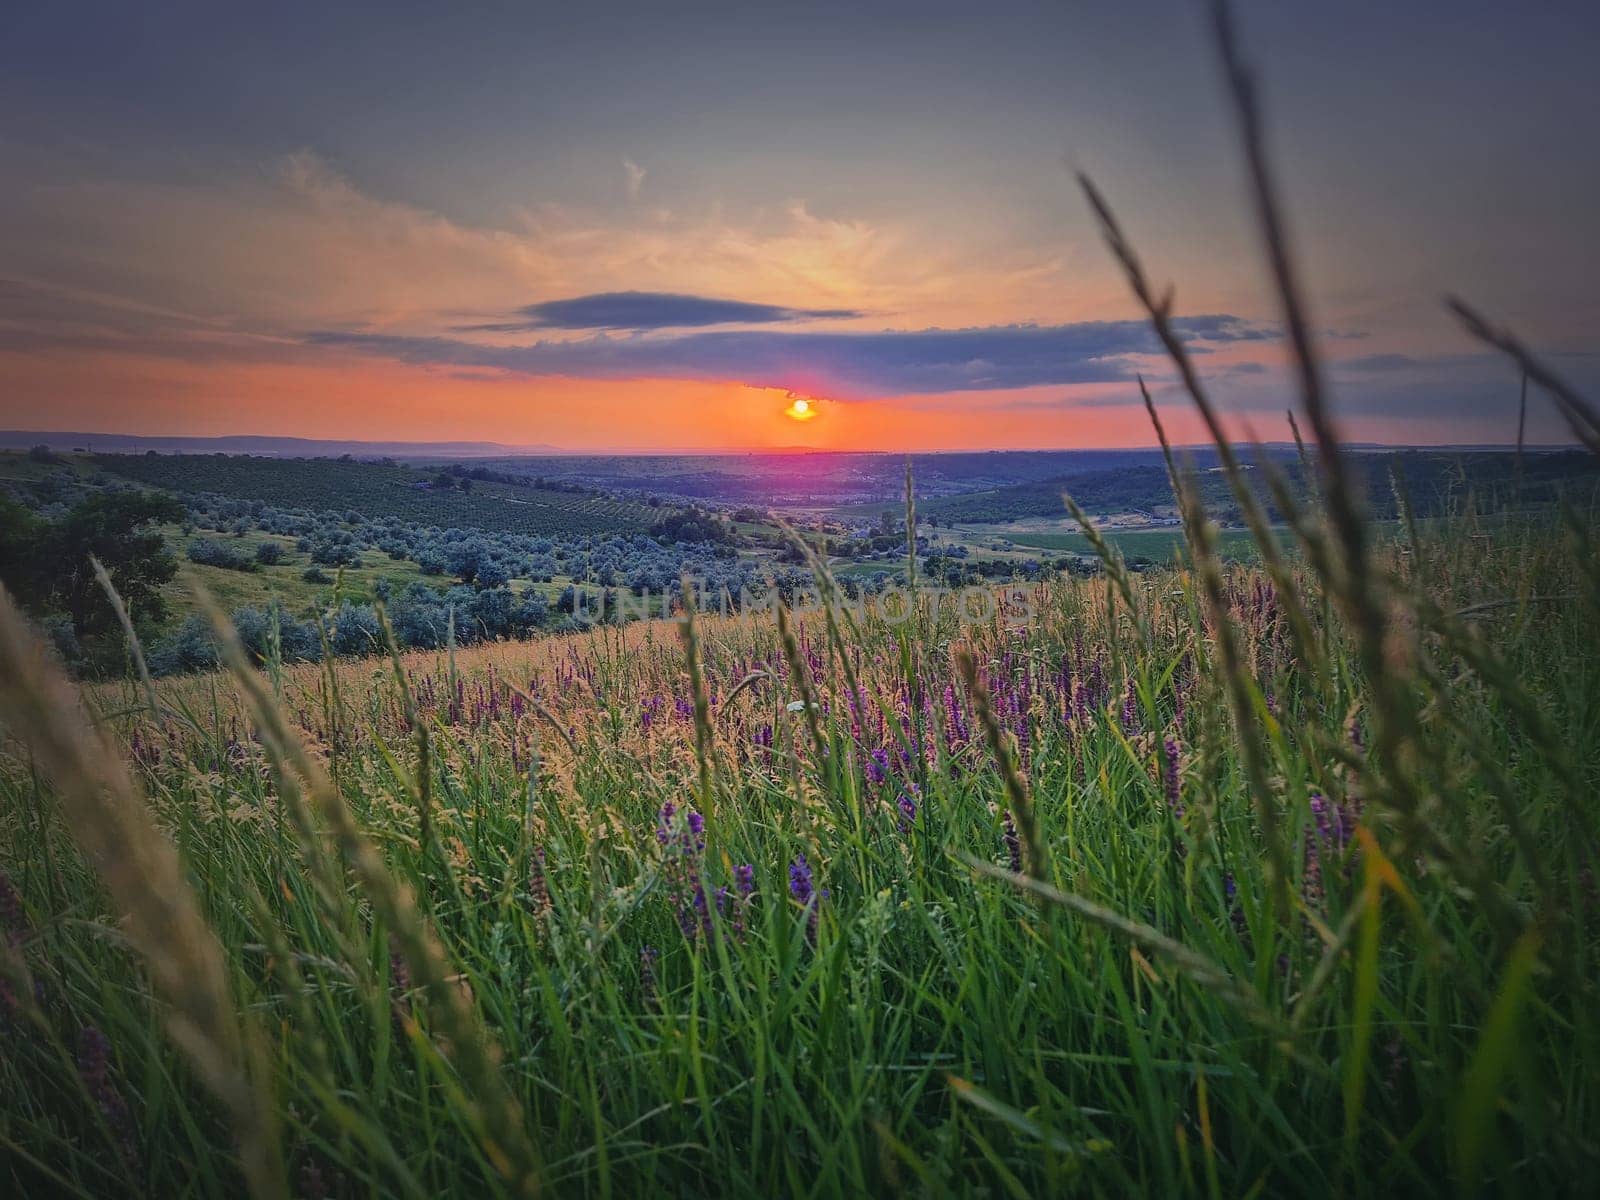 Summer sunset landscape with a view over the green valley with purple flowers